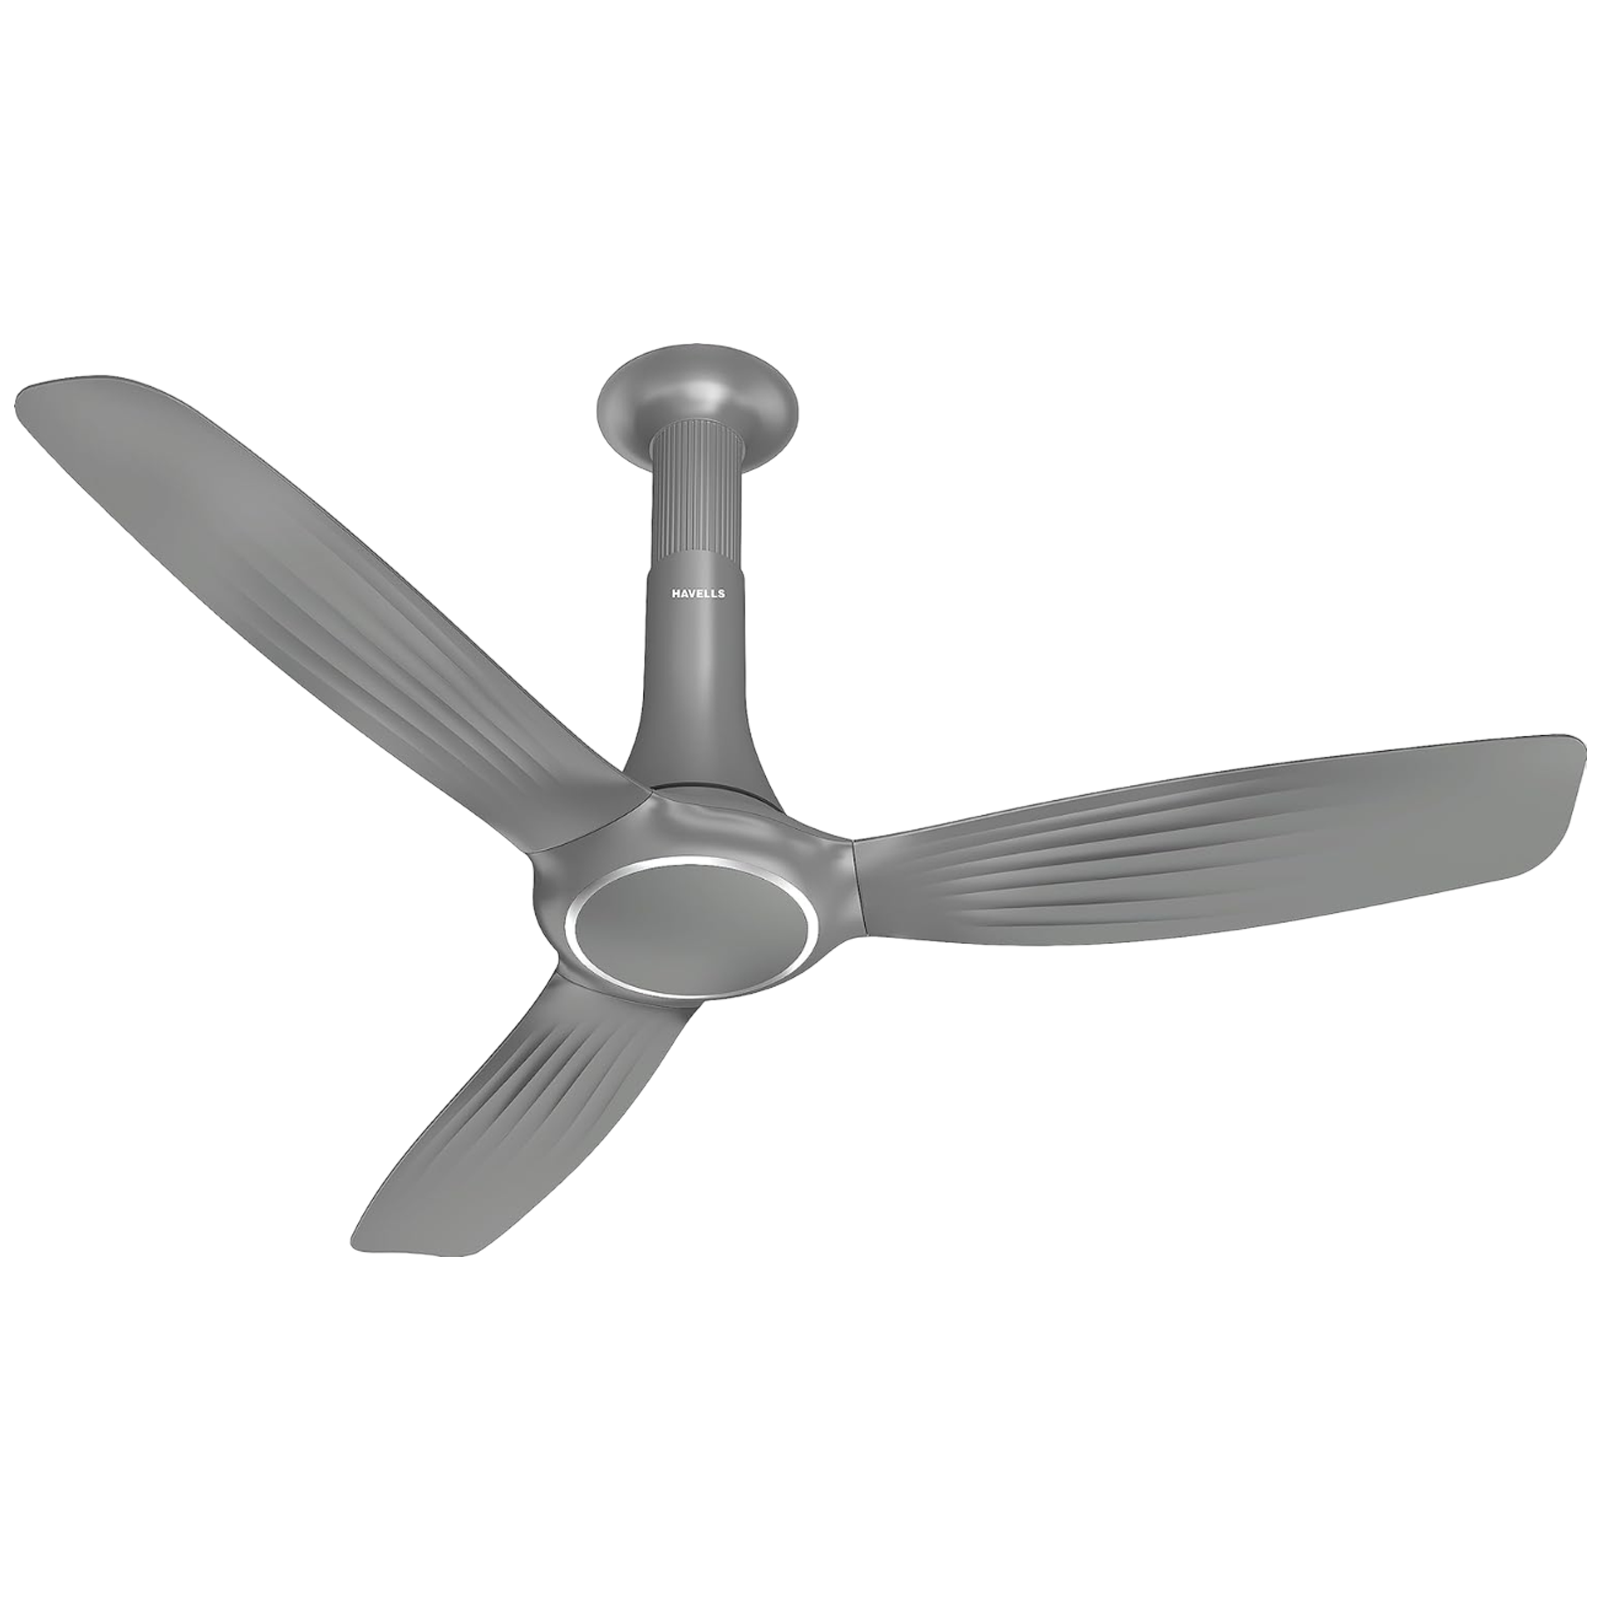 HAVELLS Inox 5 Star 1200mm 3 Blade BLDC Motor Ceiling Fan with Remote (Inverter Technology, Slate)